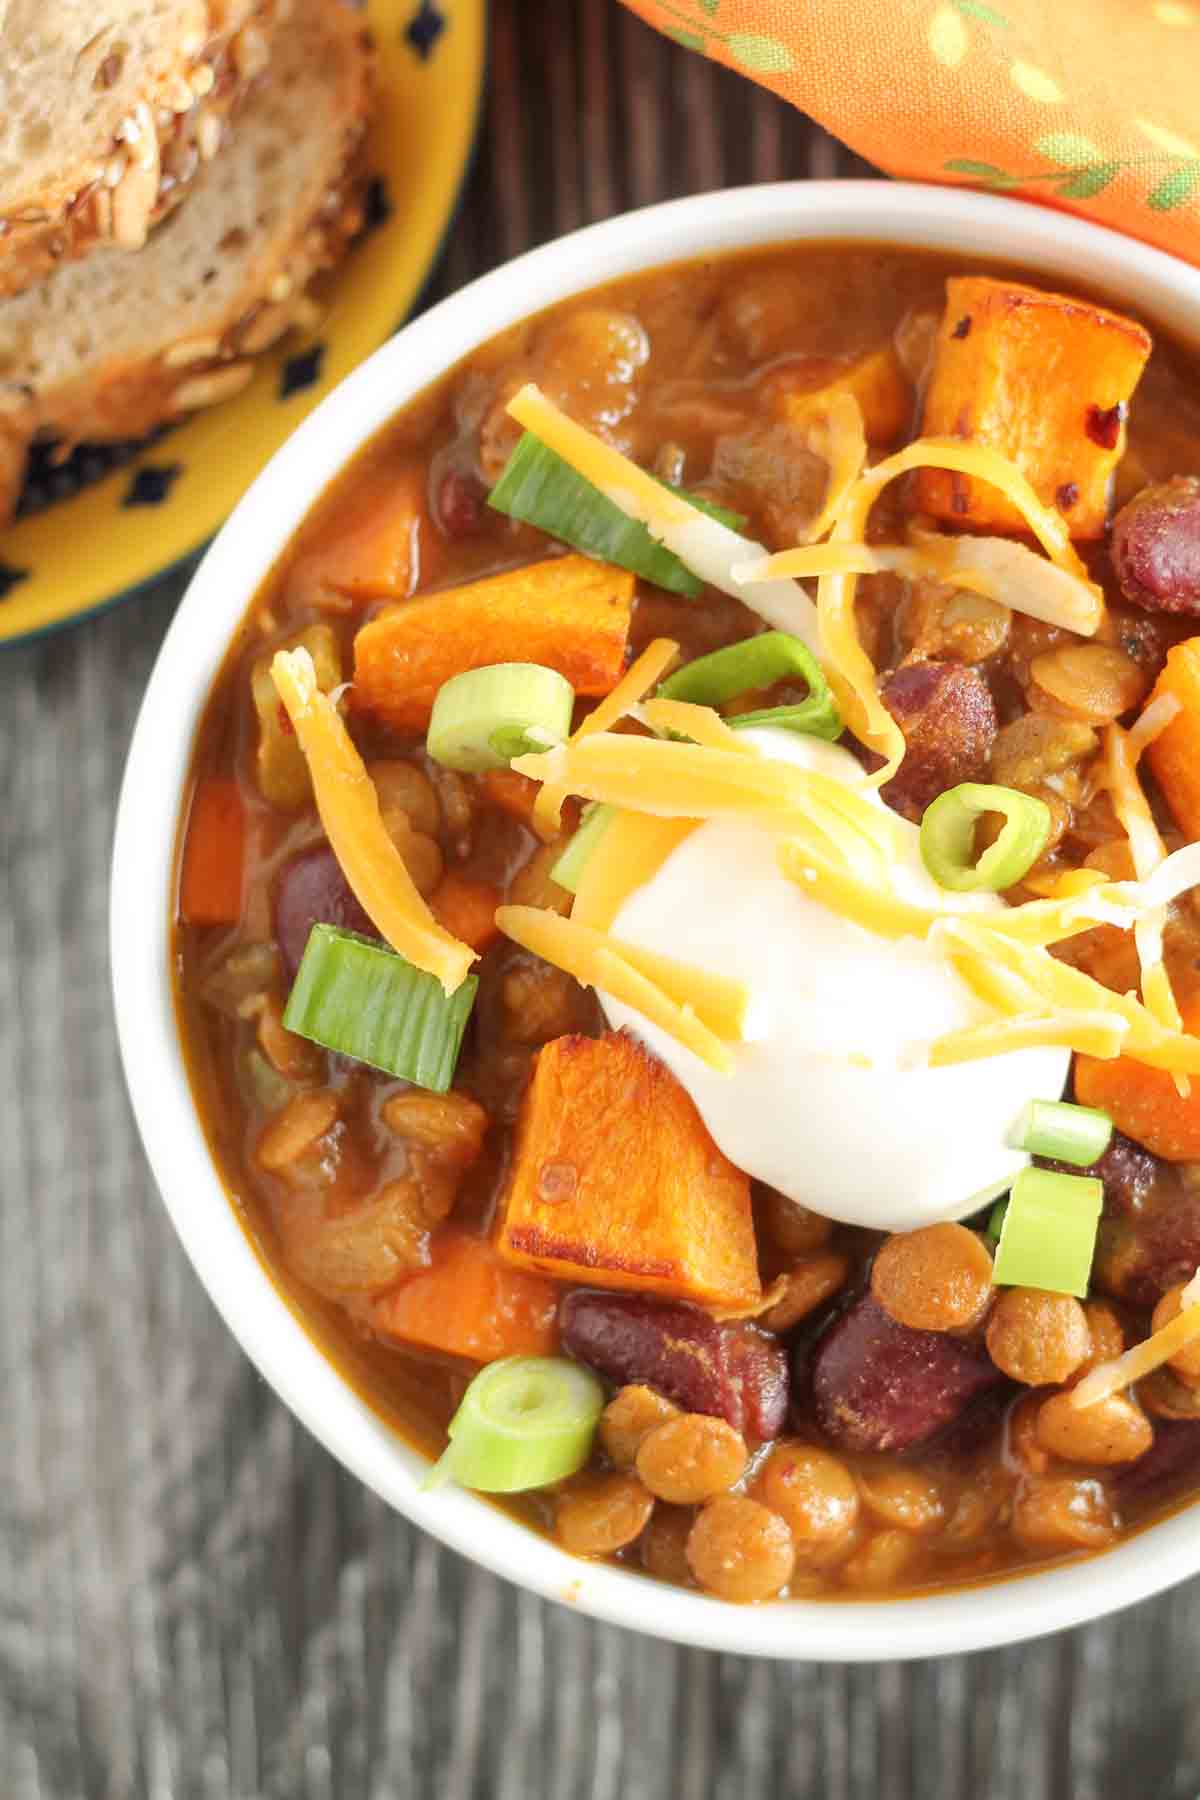 vegetarian lentil chili with roasted butternut squash in a bowl garnished with green onions